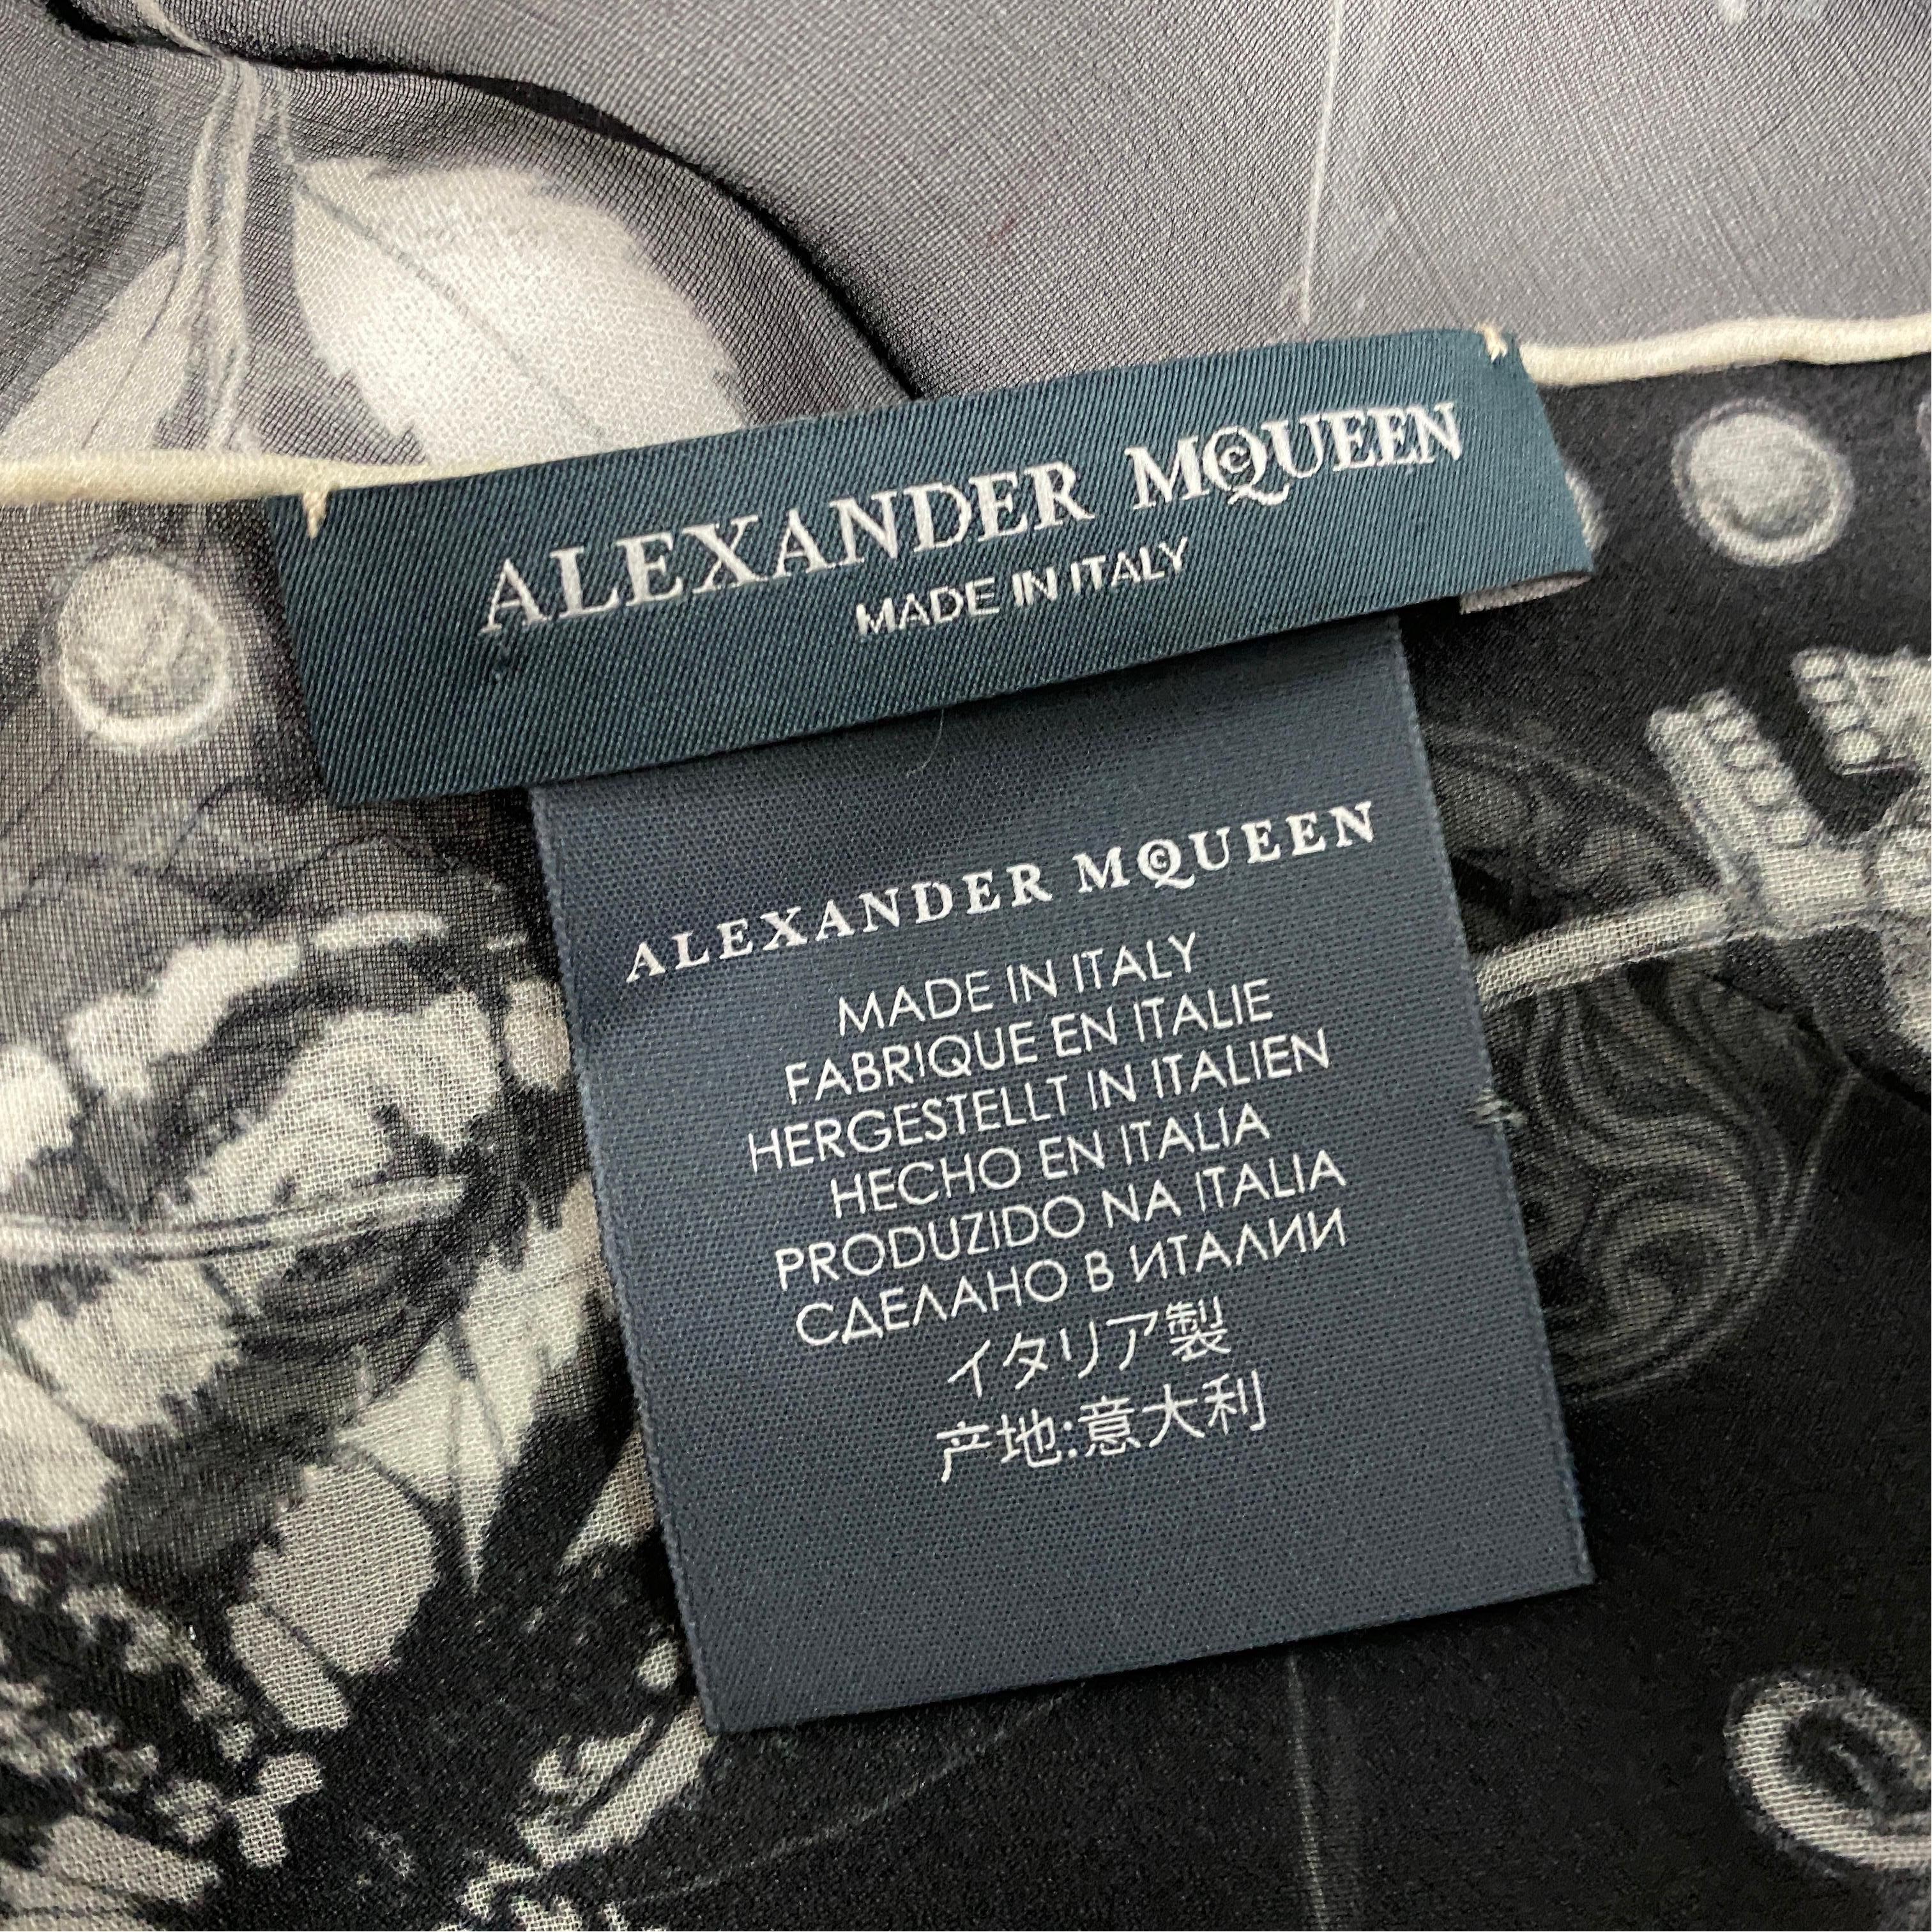 Iconic Black and White Silk Scarf by Alexander McQueen, with central Skull 2